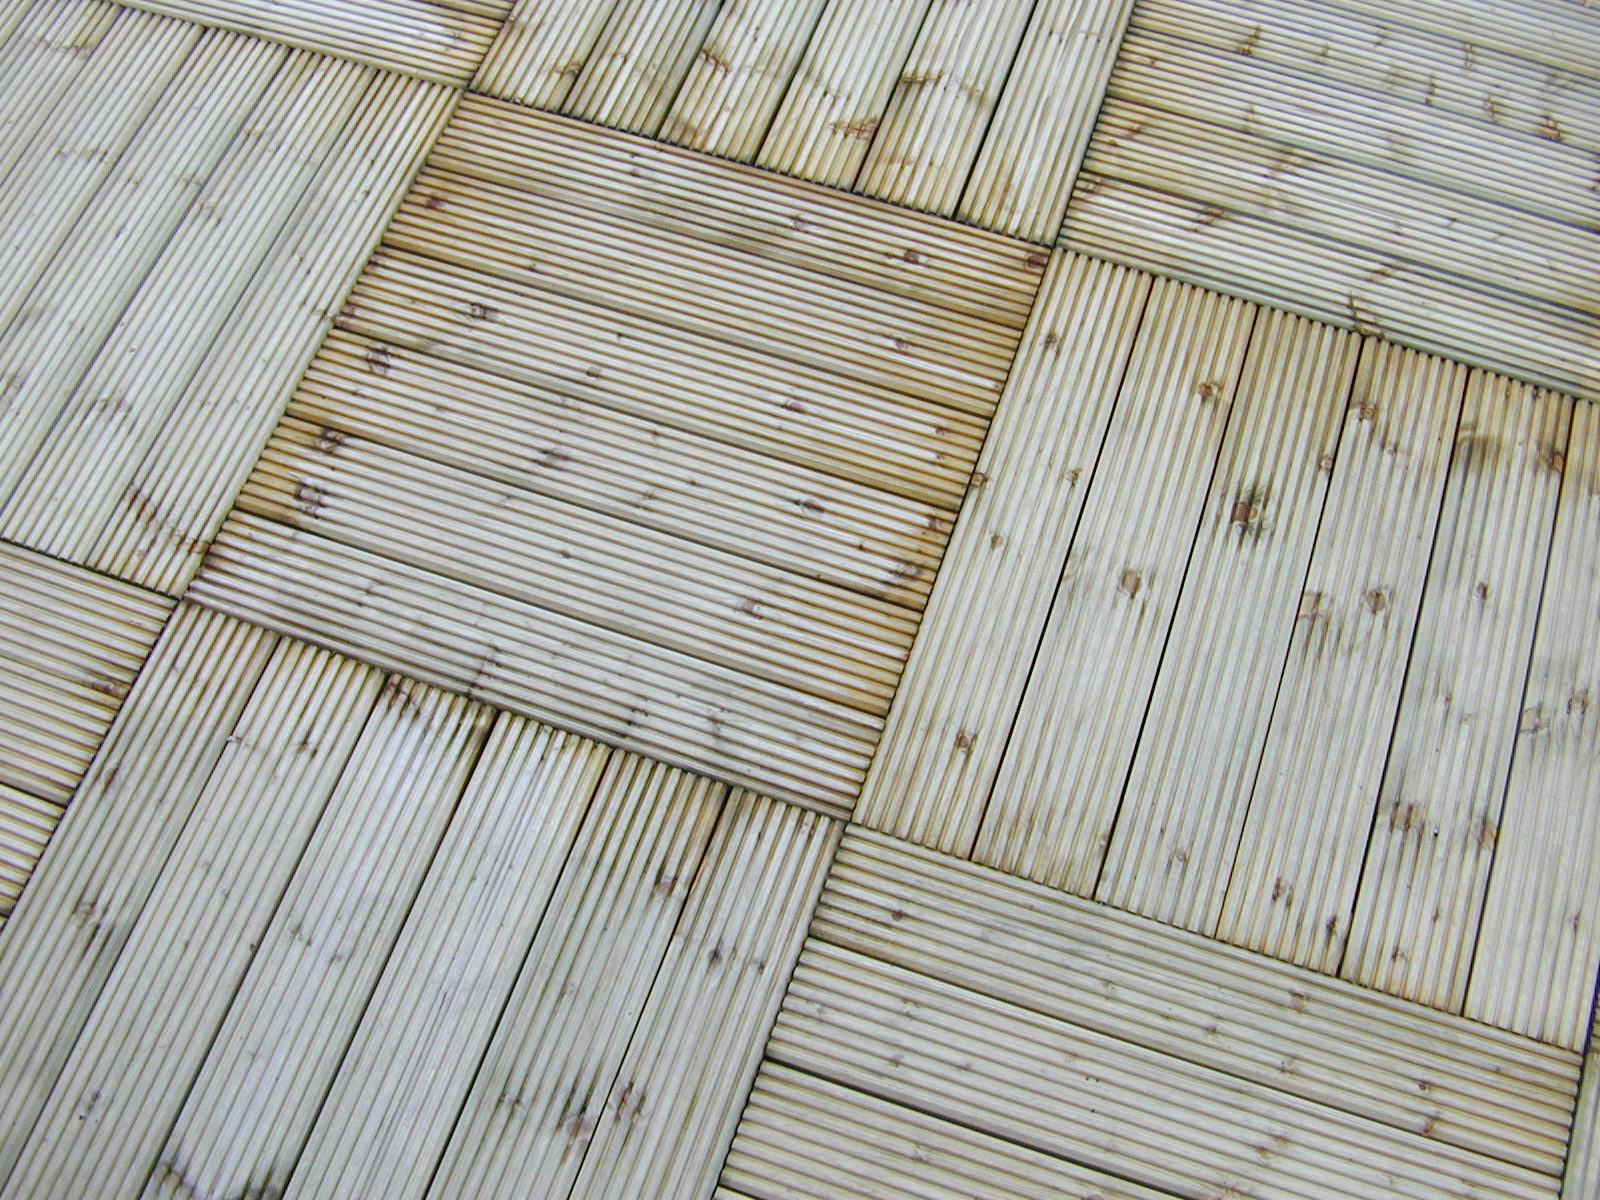 square wood deck | Free backgrounds and textures | Cr103.com